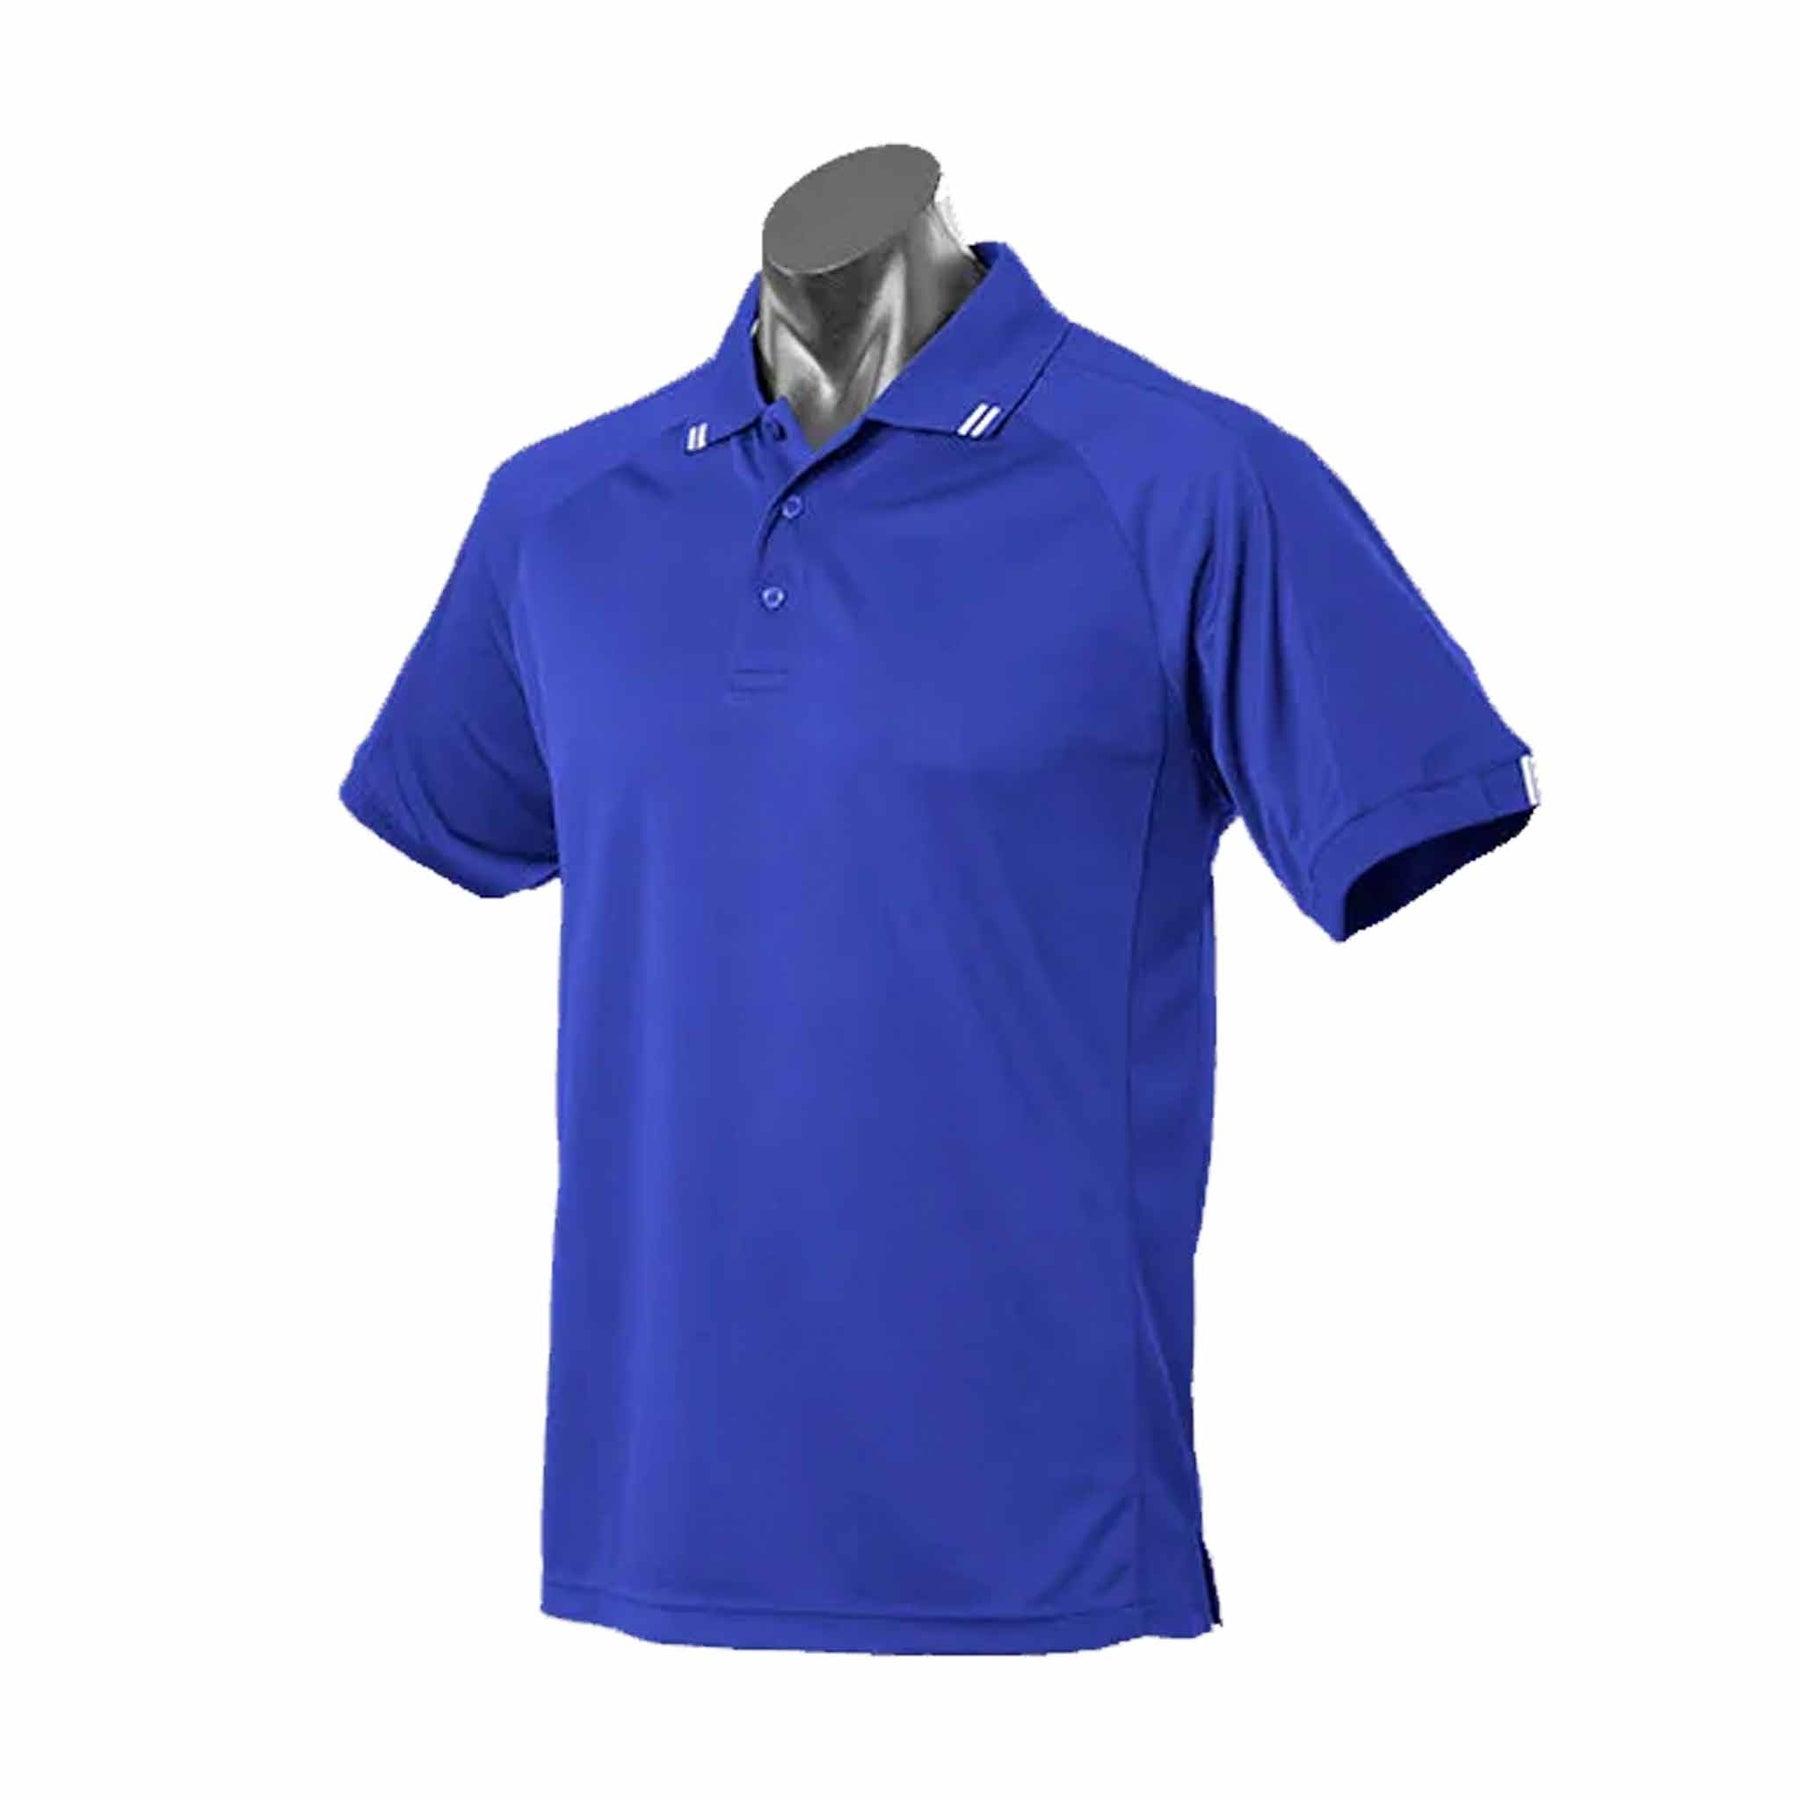 aussie pacific flinders polo in royal white